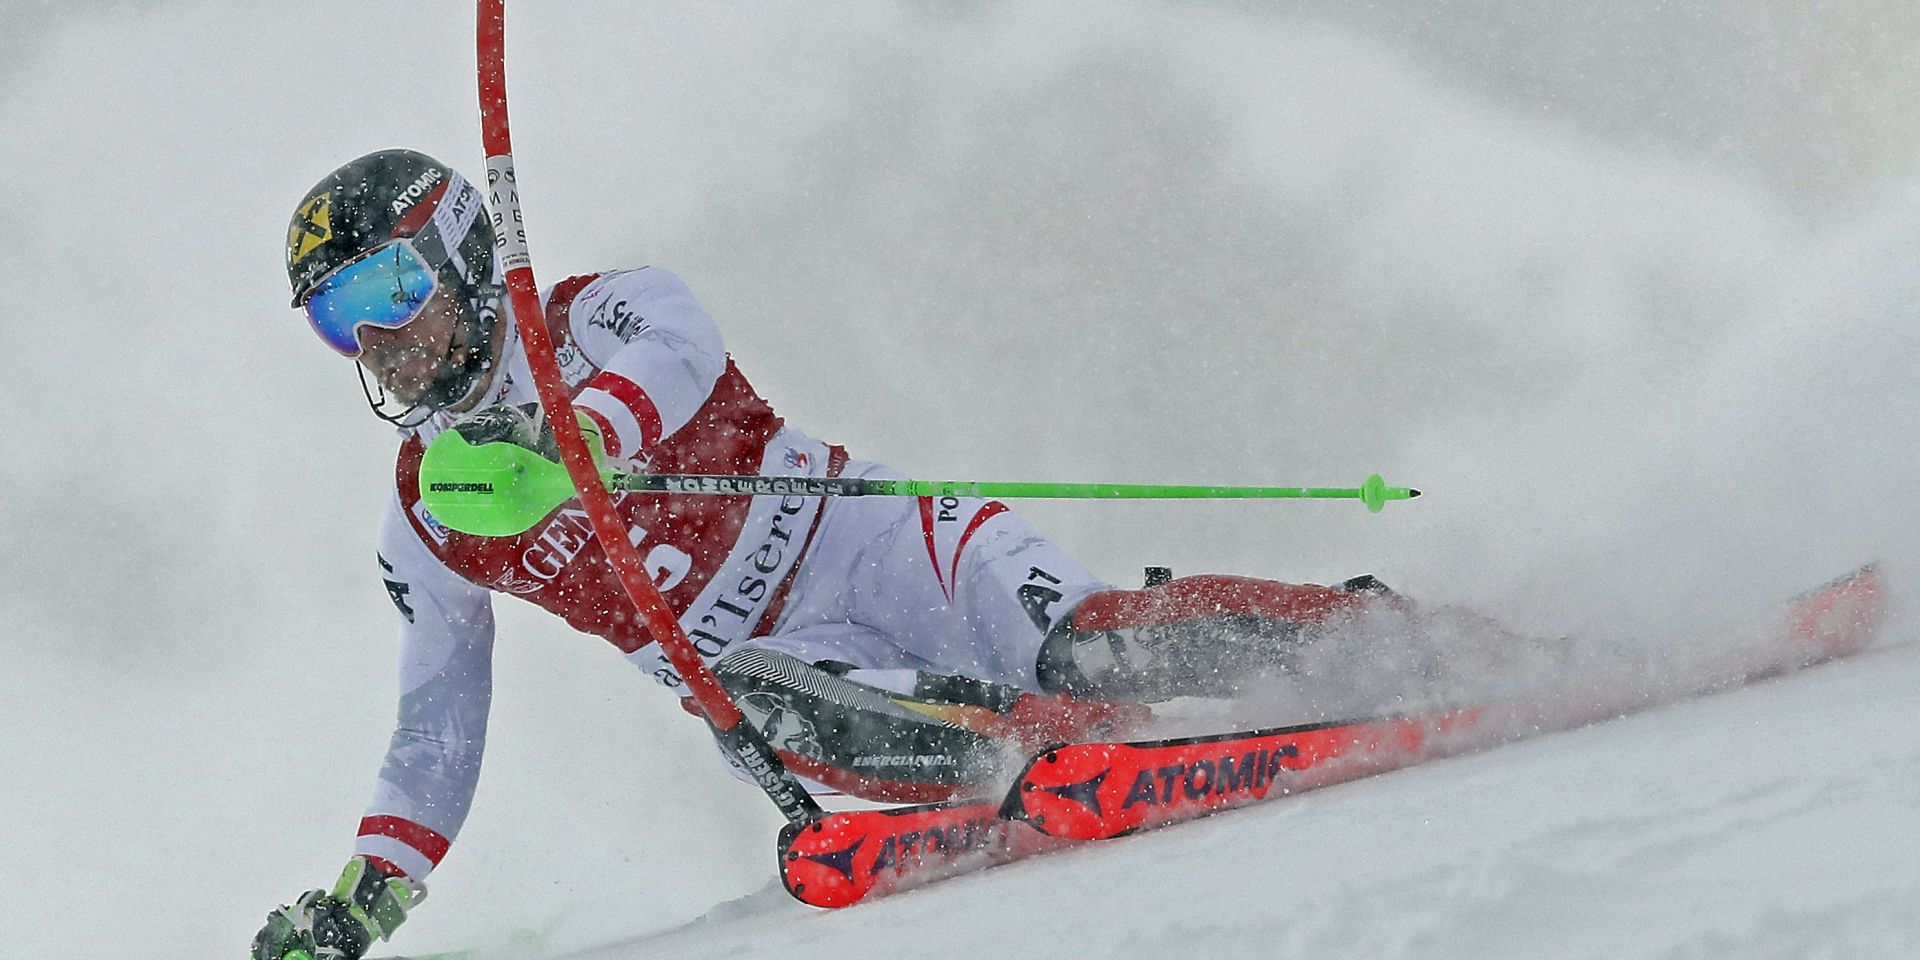 epa06380607 Marcel Hirscher of Austria in action during the first run of the men's Slalom race at the FIS Alpine Skiing World Cup in Val D'Isere, France, 10 December 2017.  EPA/GUILLAUME HORCAJUELO